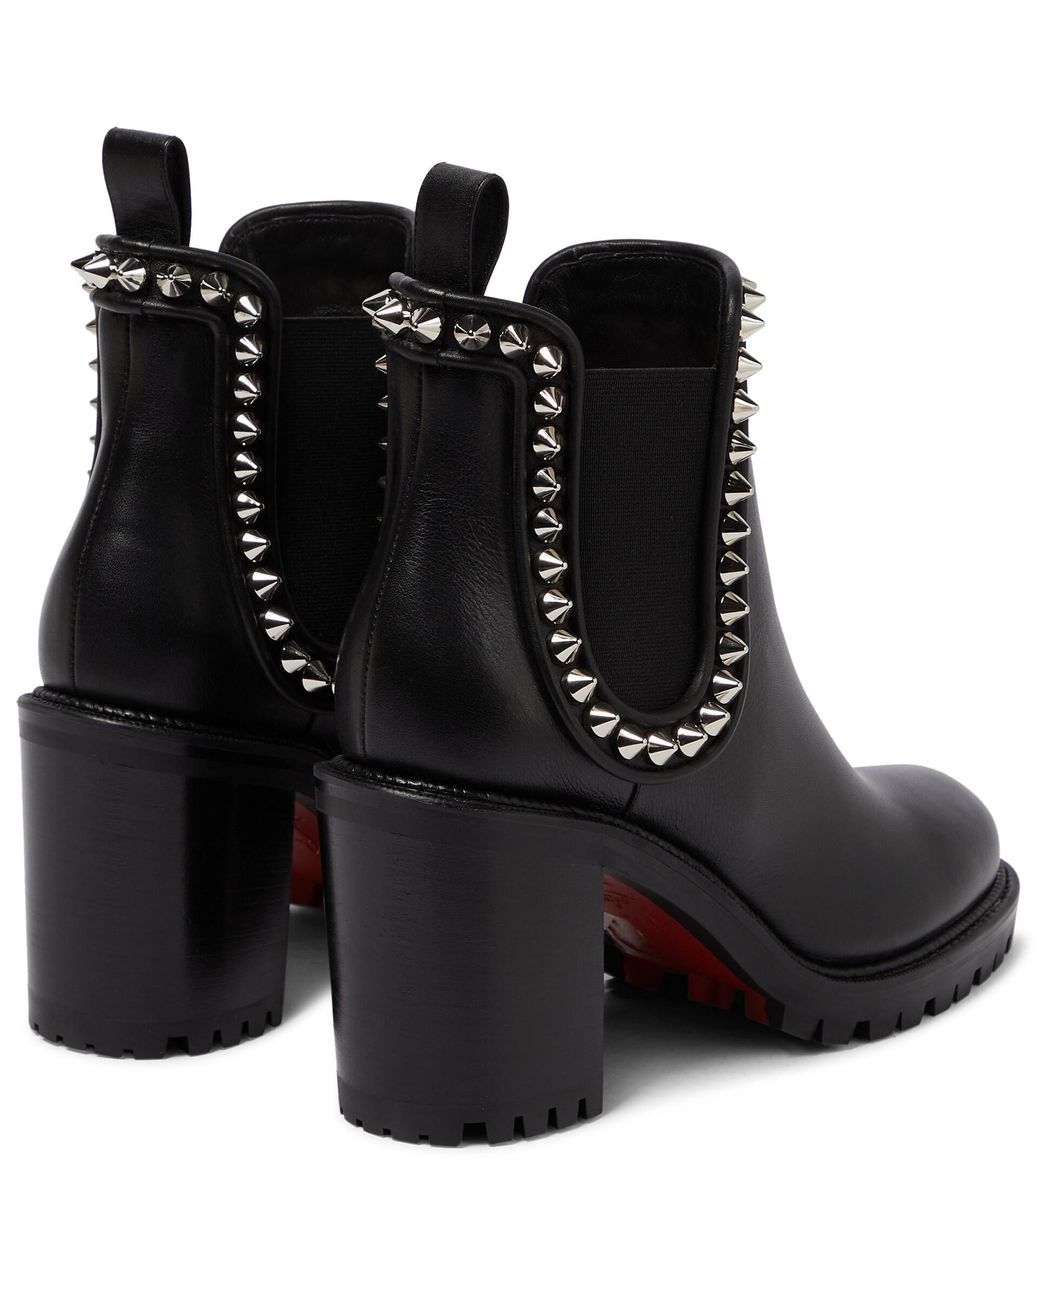 Christian Louboutin Capahutta Embellished Leather Ankle Boots in Black |  Lyst